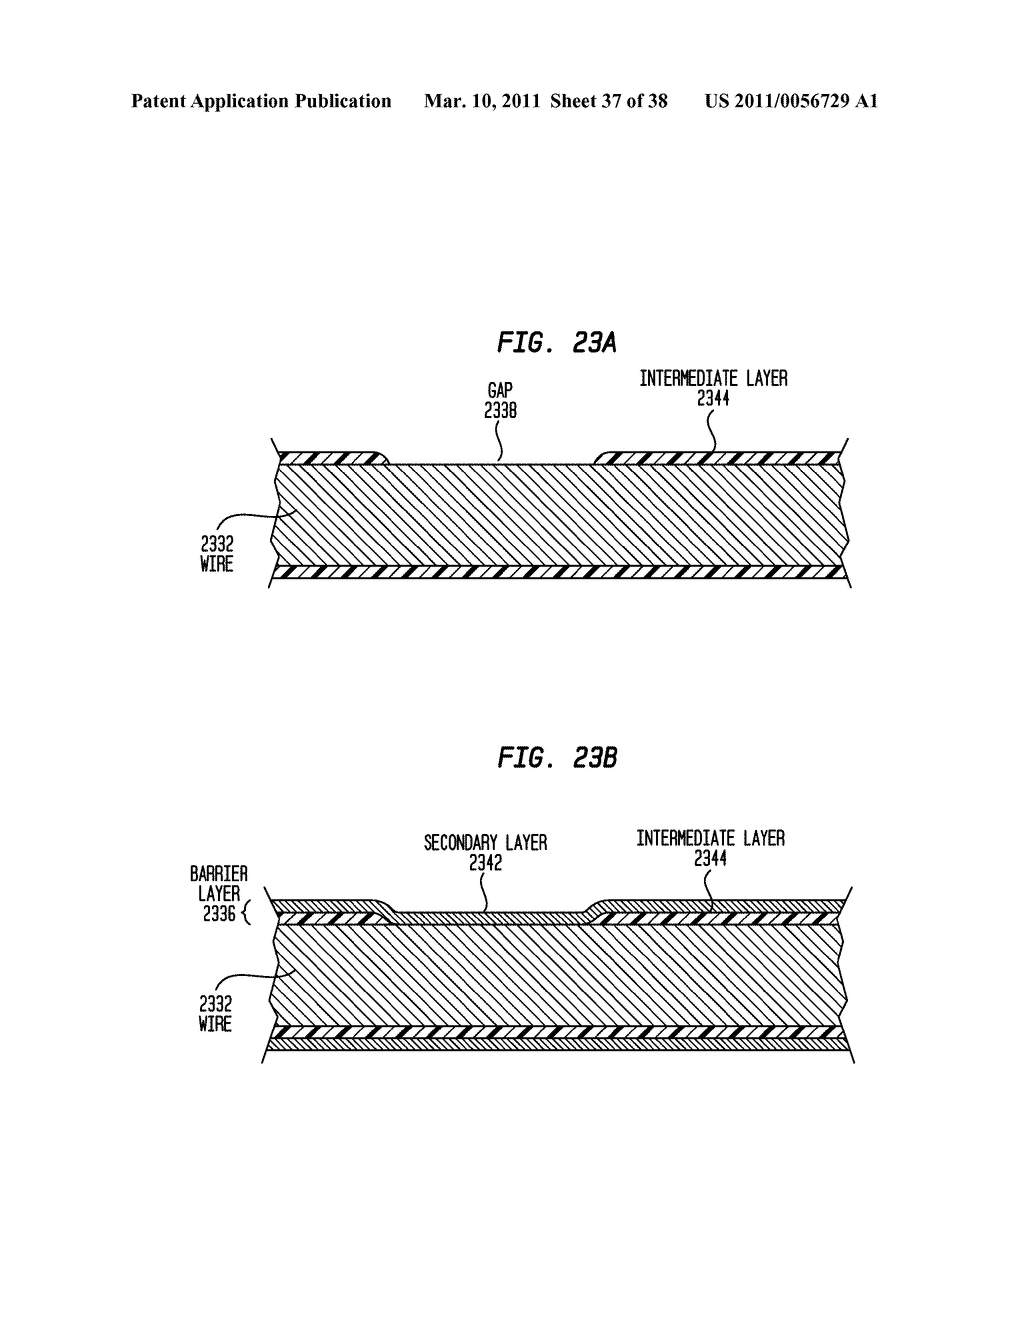 INSULATED CONDUCTIVE ELEMENT HAVING A SUBSTANTIALLY CONTINUOUS BARRIER LAYER FORMED THROUGH CONTINUOUS VAPOR DEPOSITION - diagram, schematic, and image 38